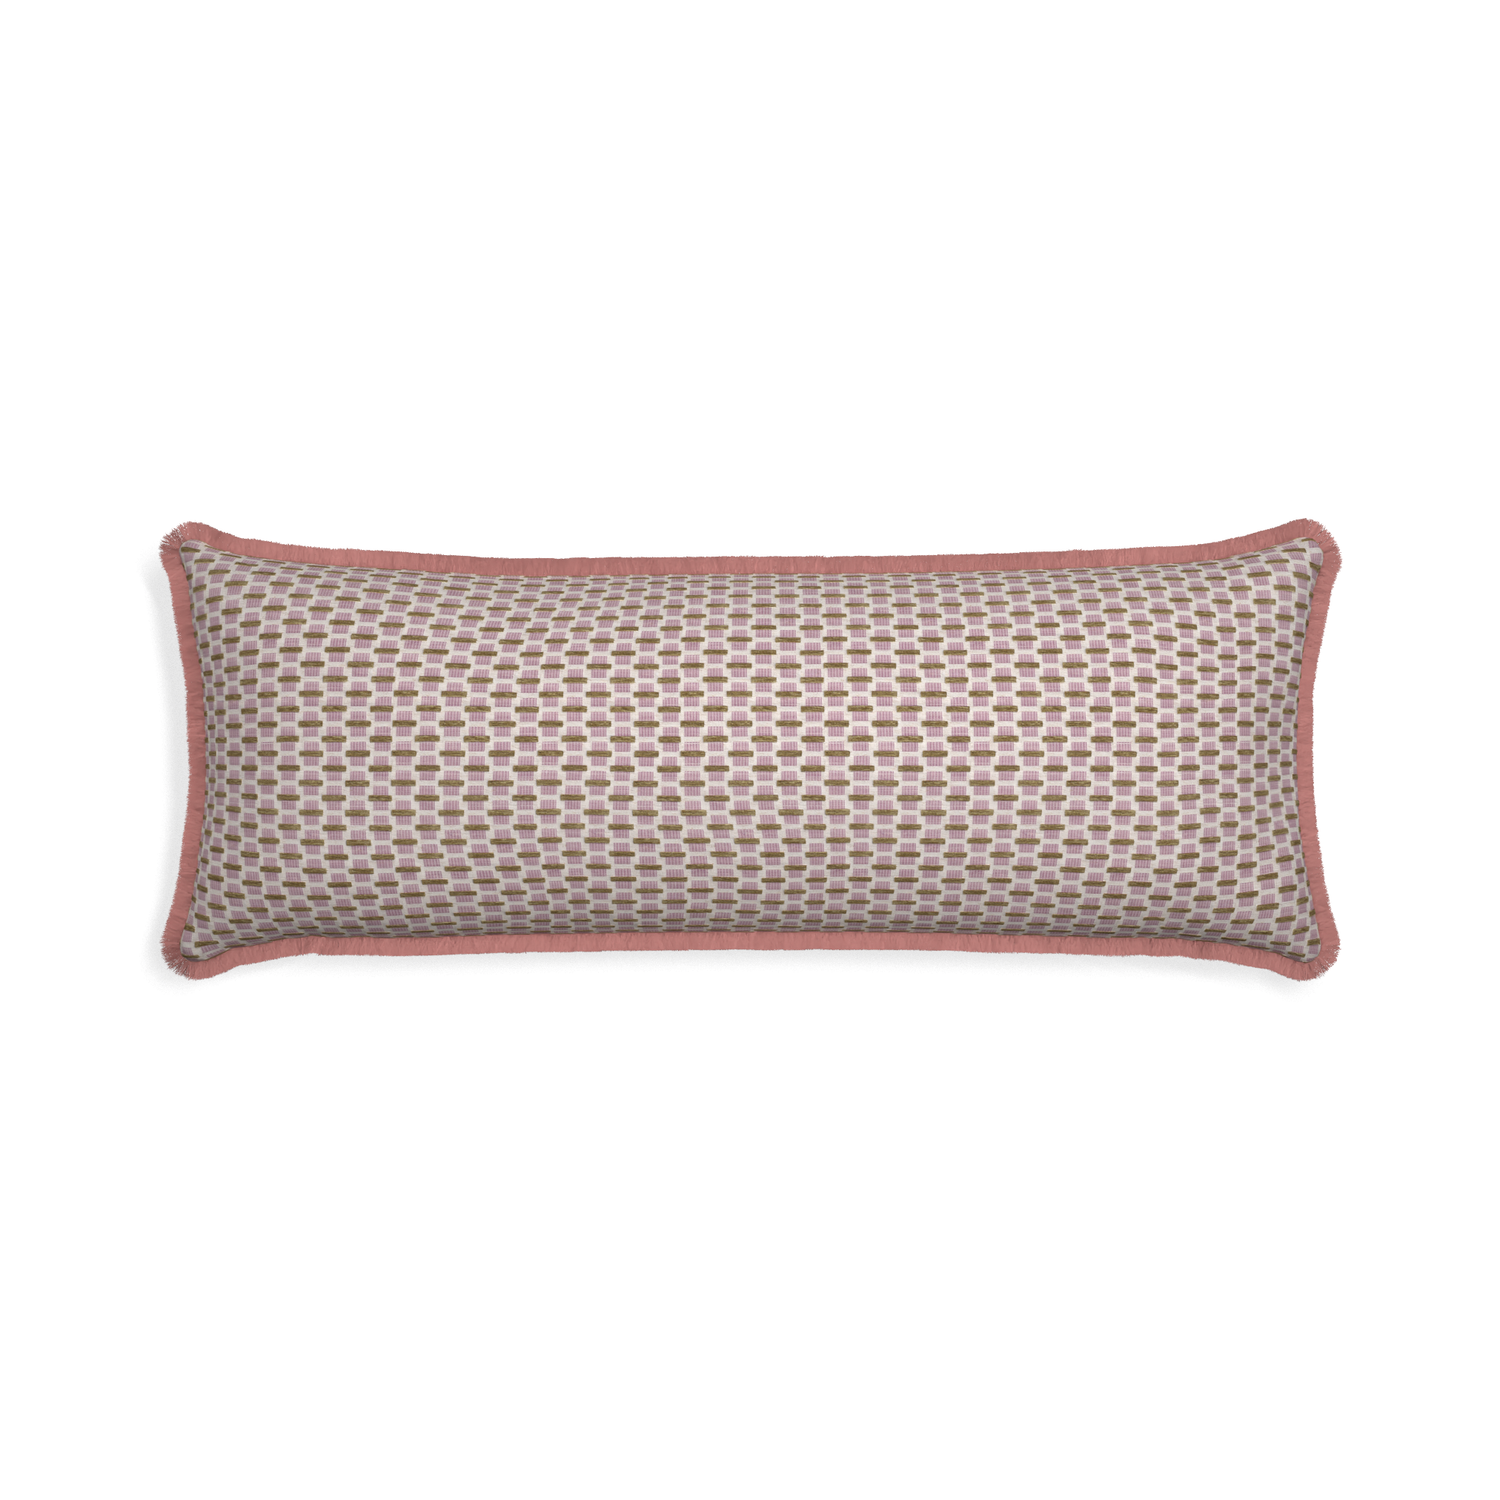 woven pink chenille jacquard lumbar pillow with pink fringe 